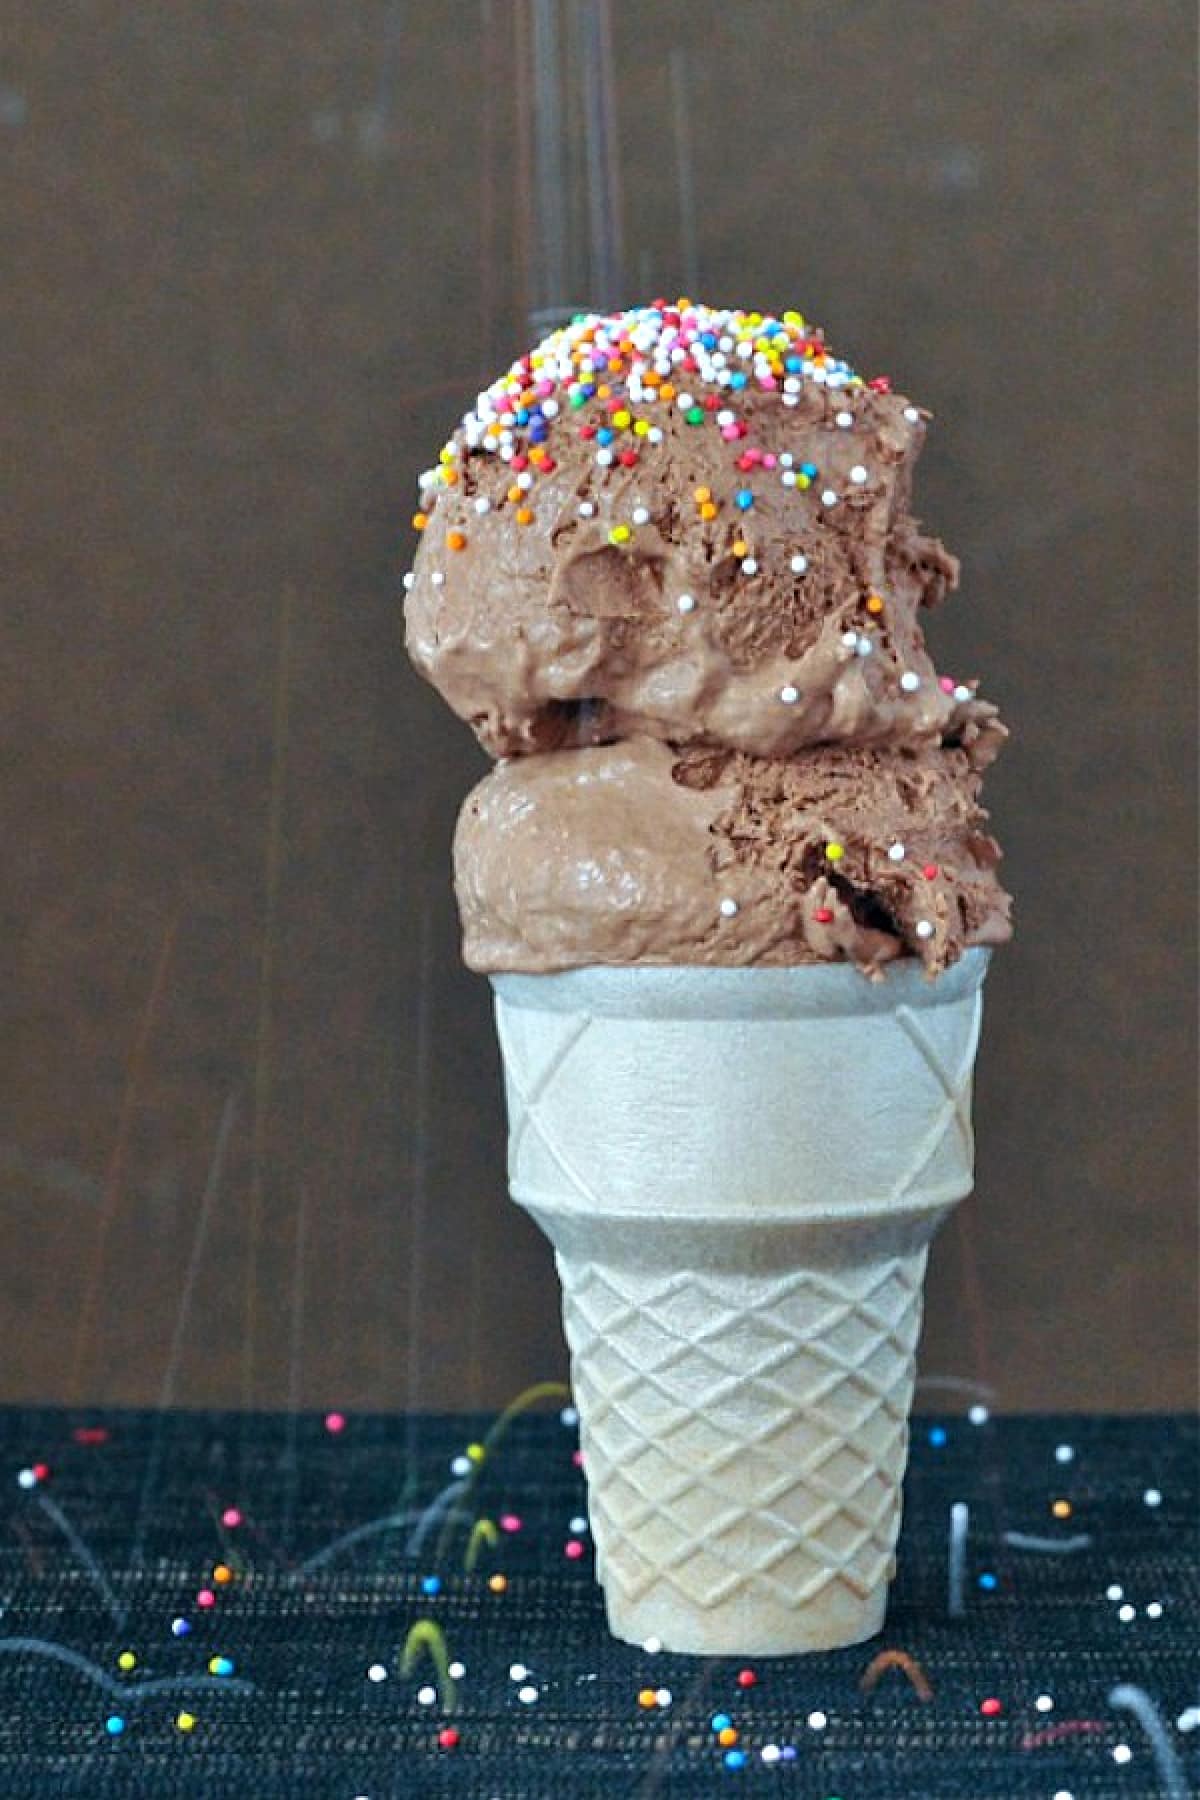 Two scoops of chocolate oat milk ice cream with rainbow colored sprinkles in a cone against a brown background.